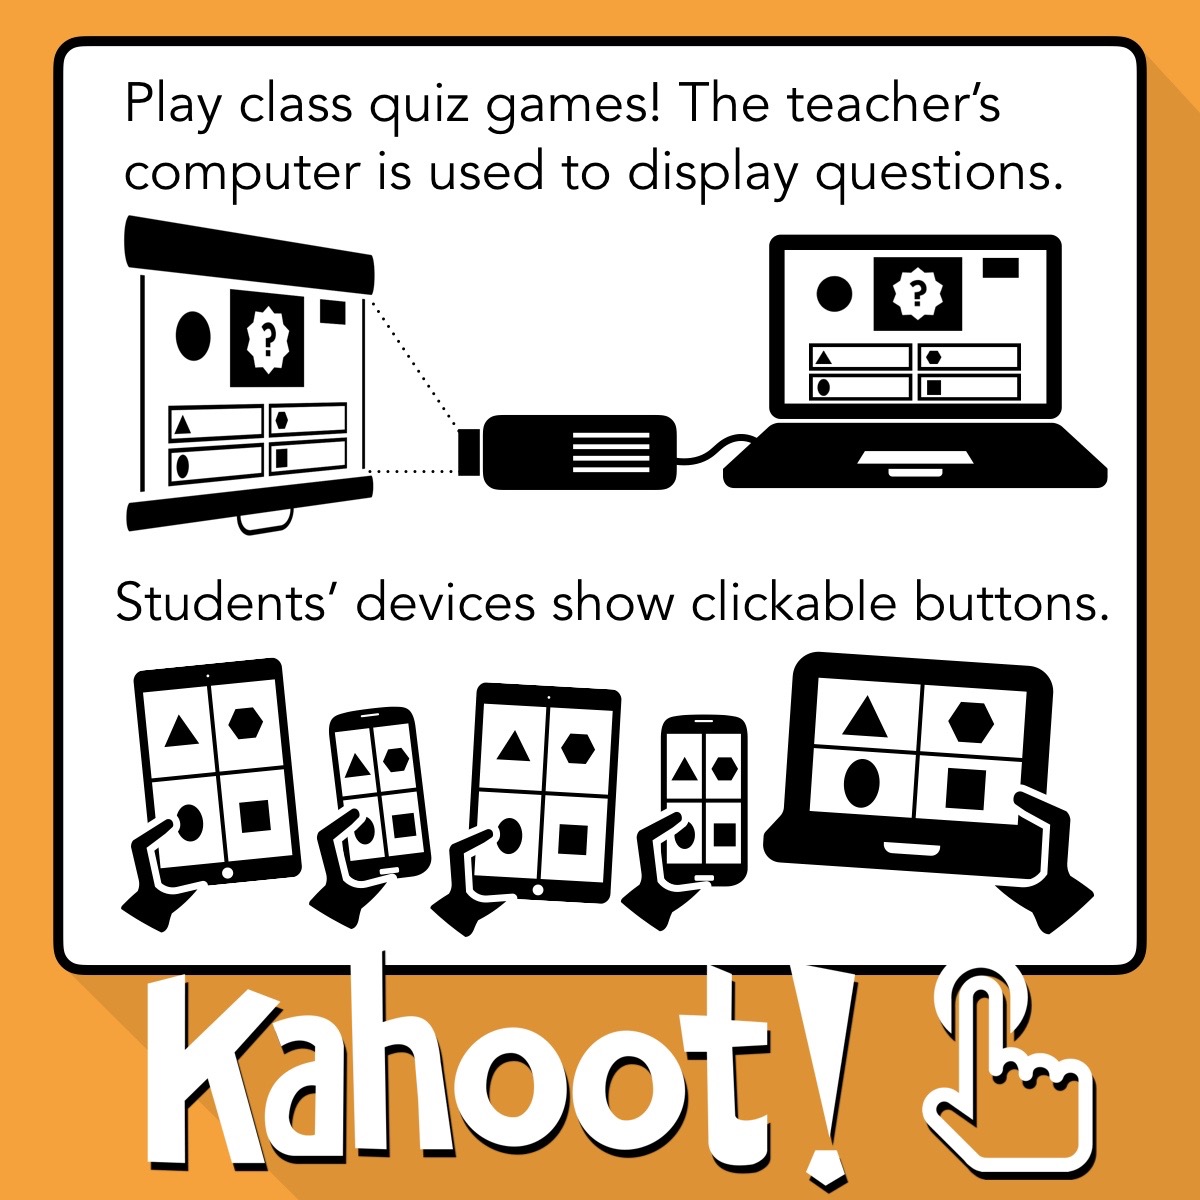 Make It - Create learning games and quizzes!